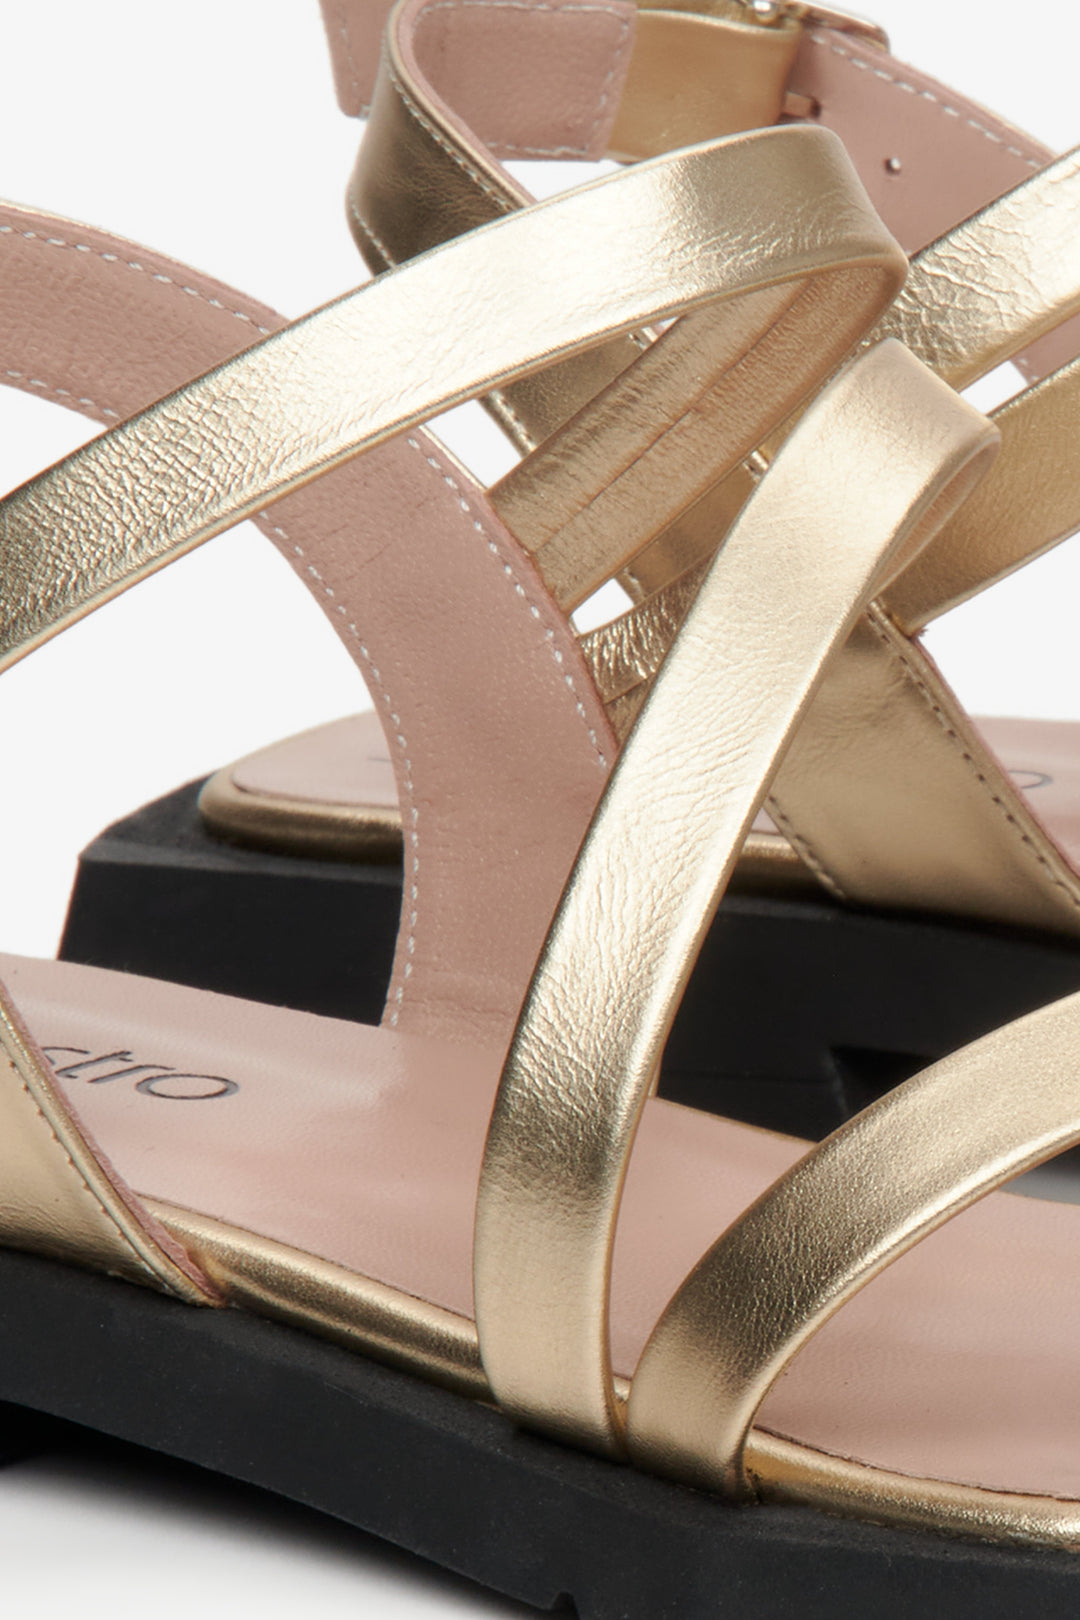 Leather, women's metallic sandals by Estro with thin straps - presentation of the rear part of the footwear.